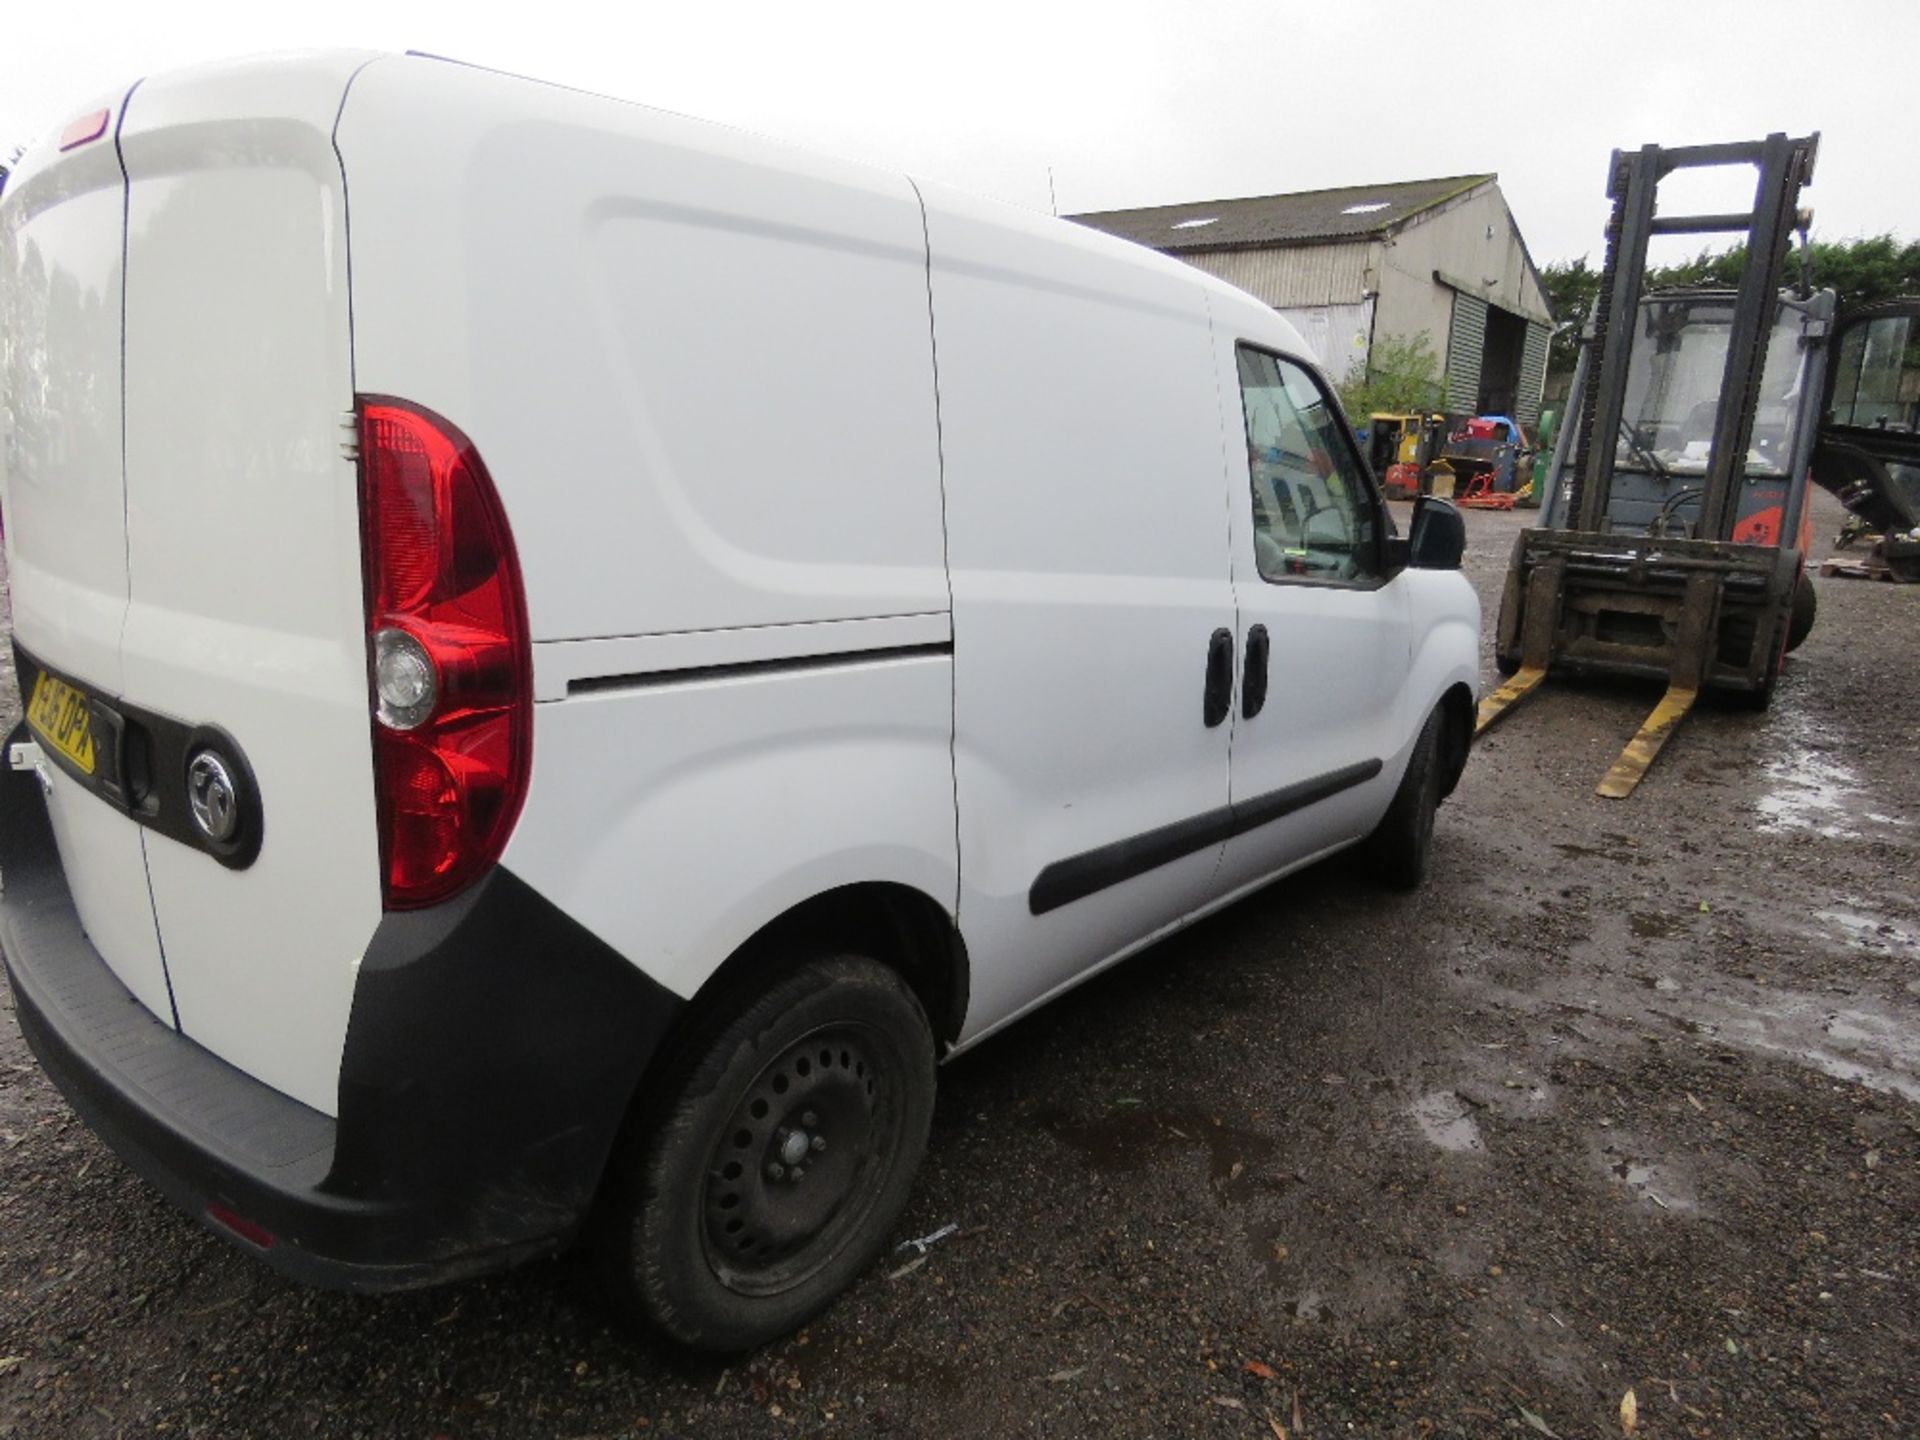 VAUXHALL COMBO 5 SEATER VAN REG: FL16 OPA. 93, 507 RECORDED MILES. WITH V5. TESTED UNTIL 2/3/24. OWN - Image 5 of 19